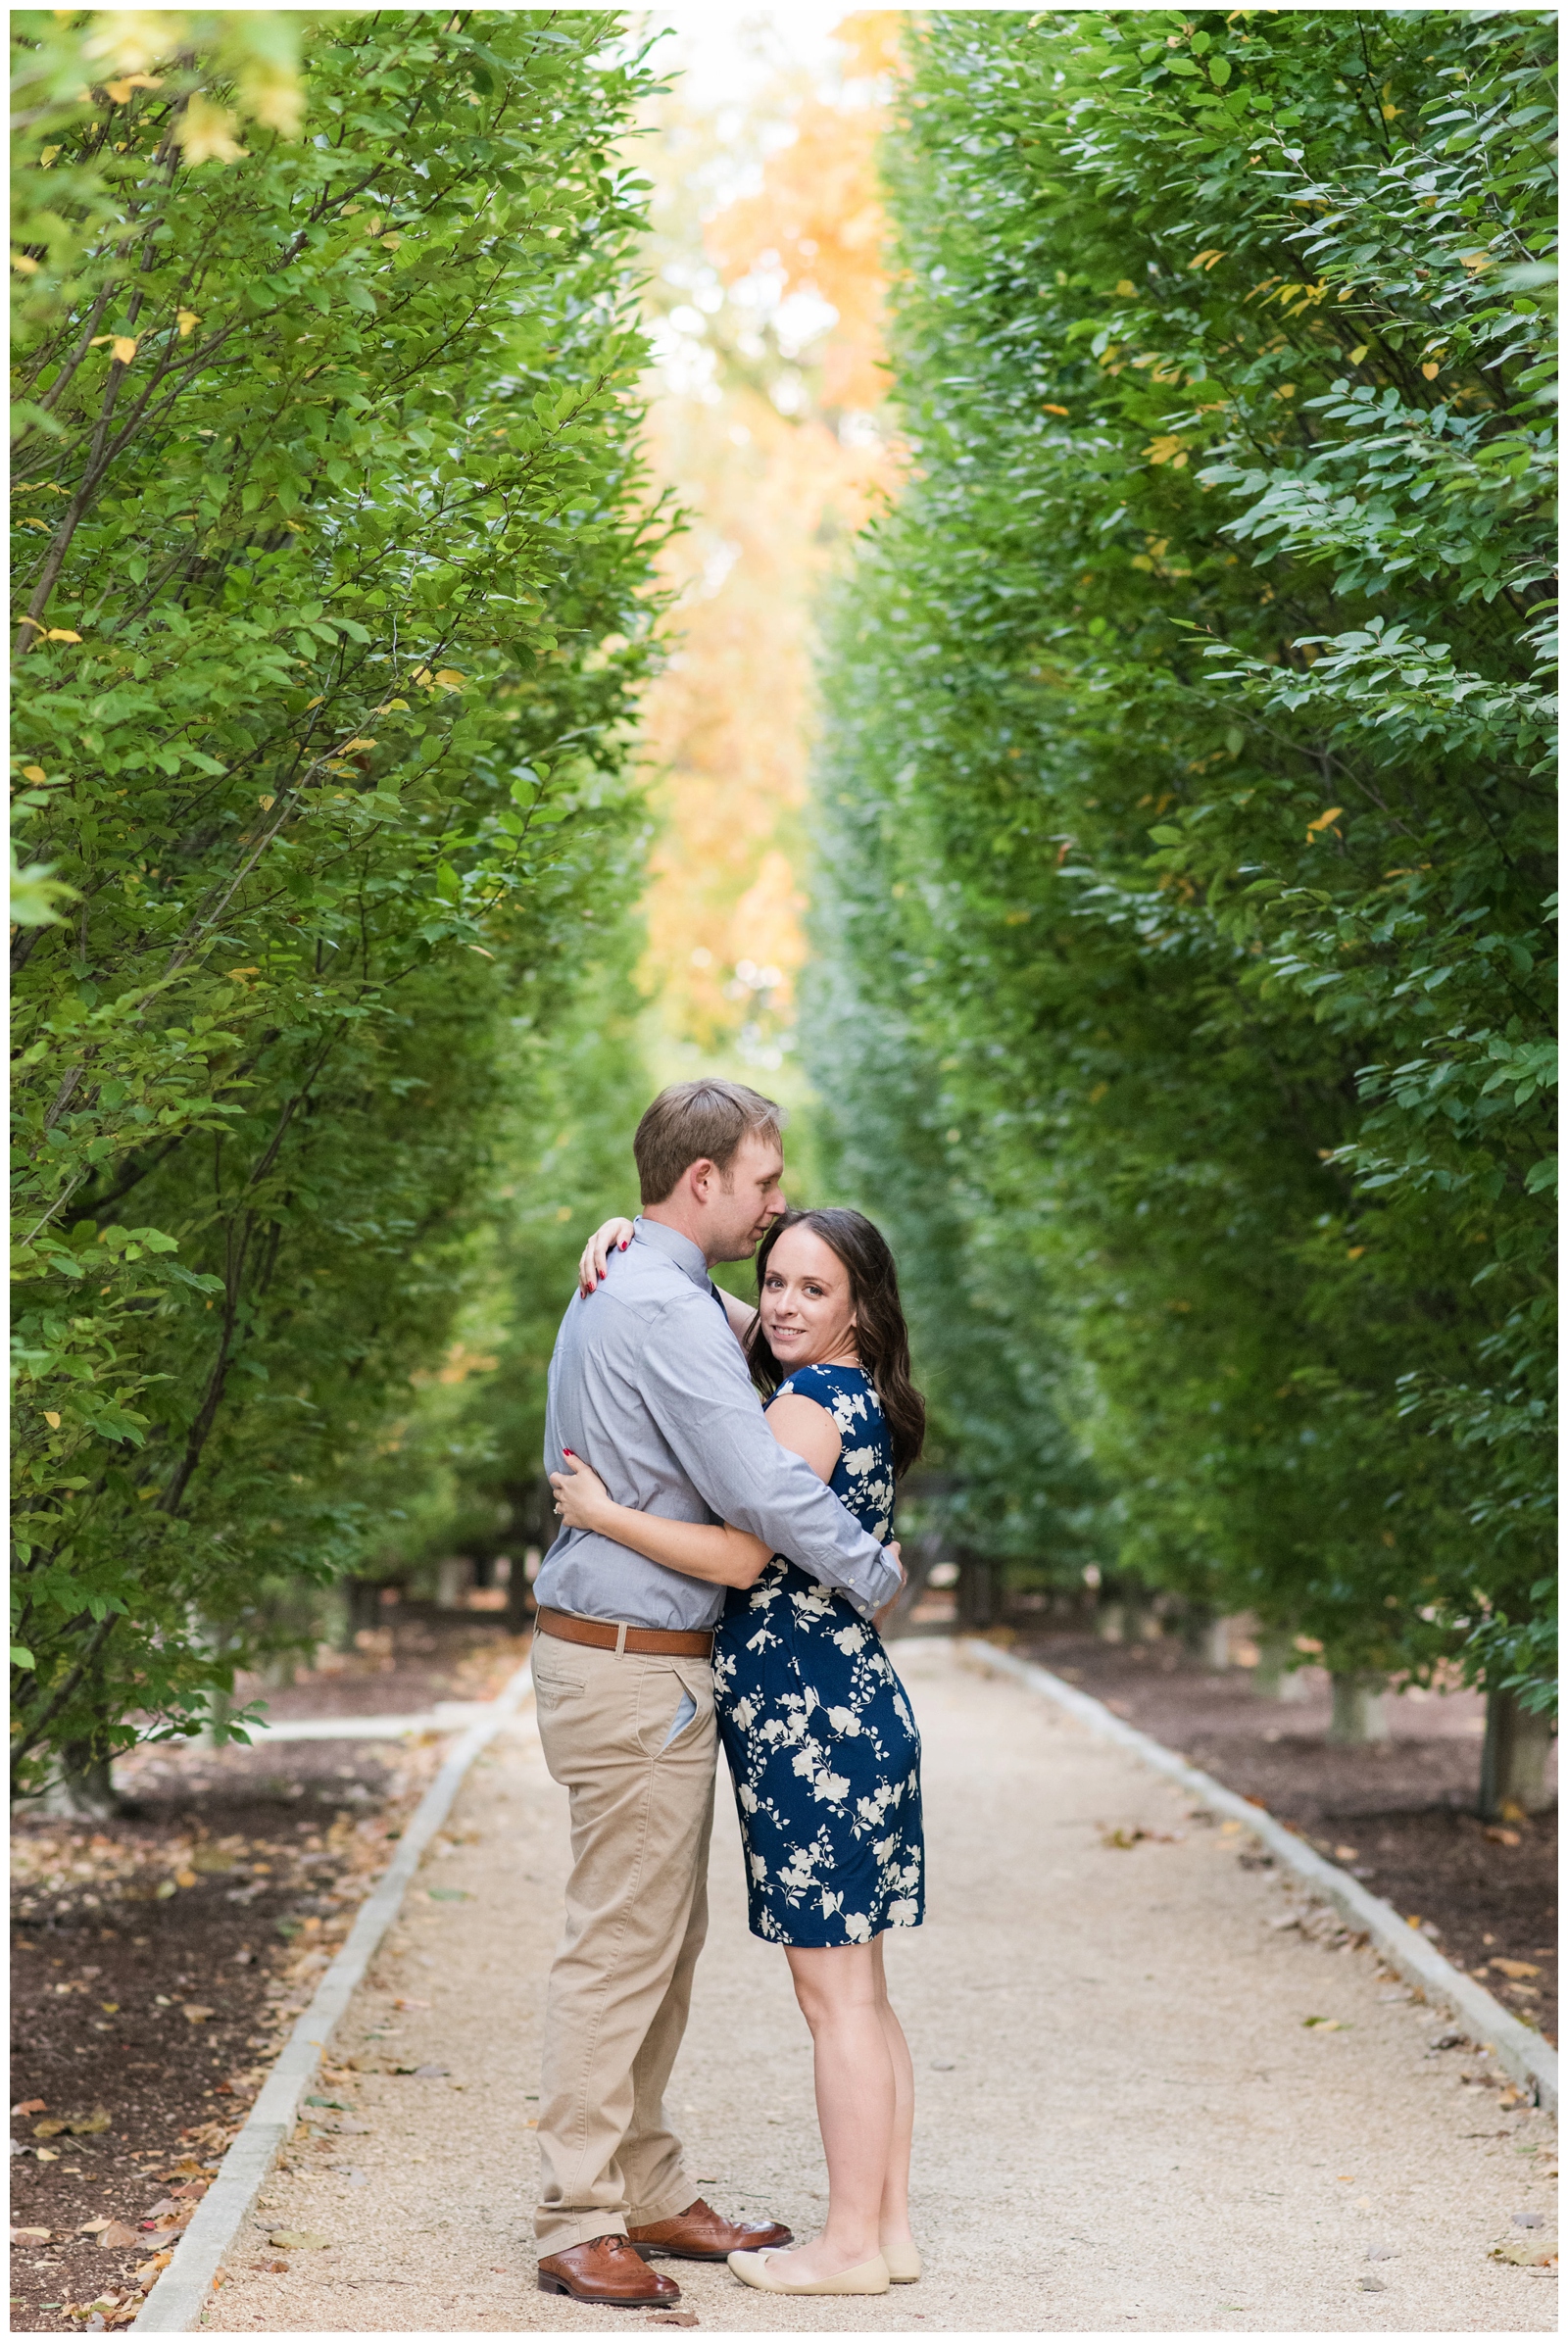 bride in blue dress with flowers hugs groom in blue shirt and khakis in walkaway at Franklin Park Conservatory